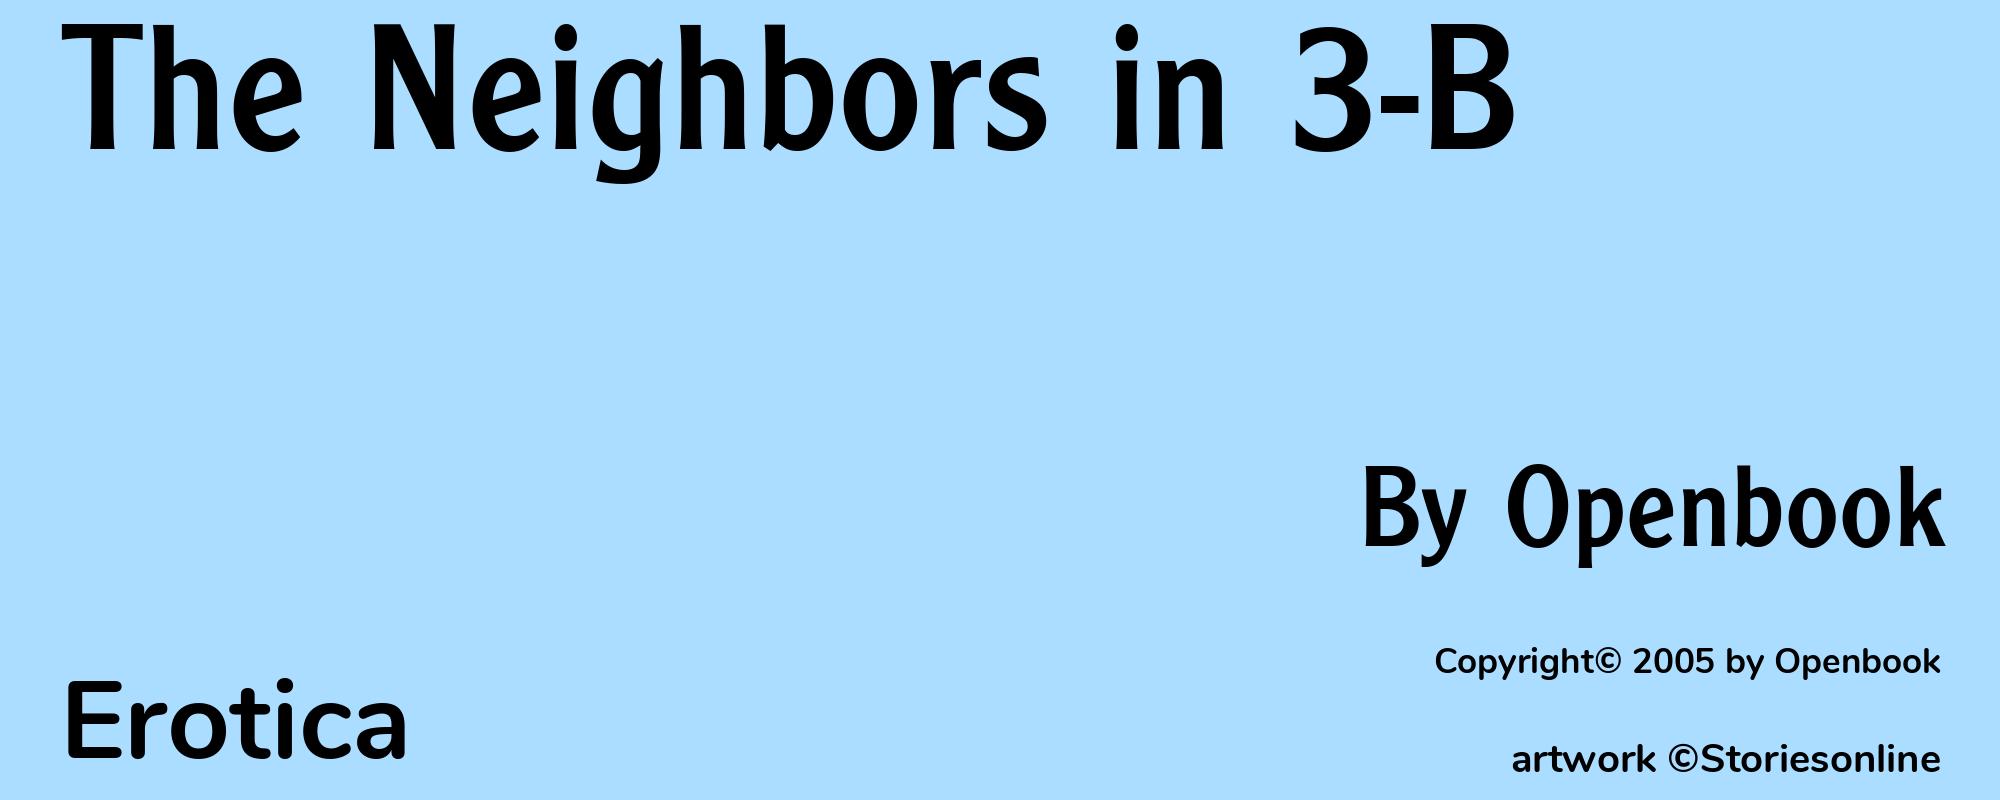 The Neighbors in 3-B - Cover